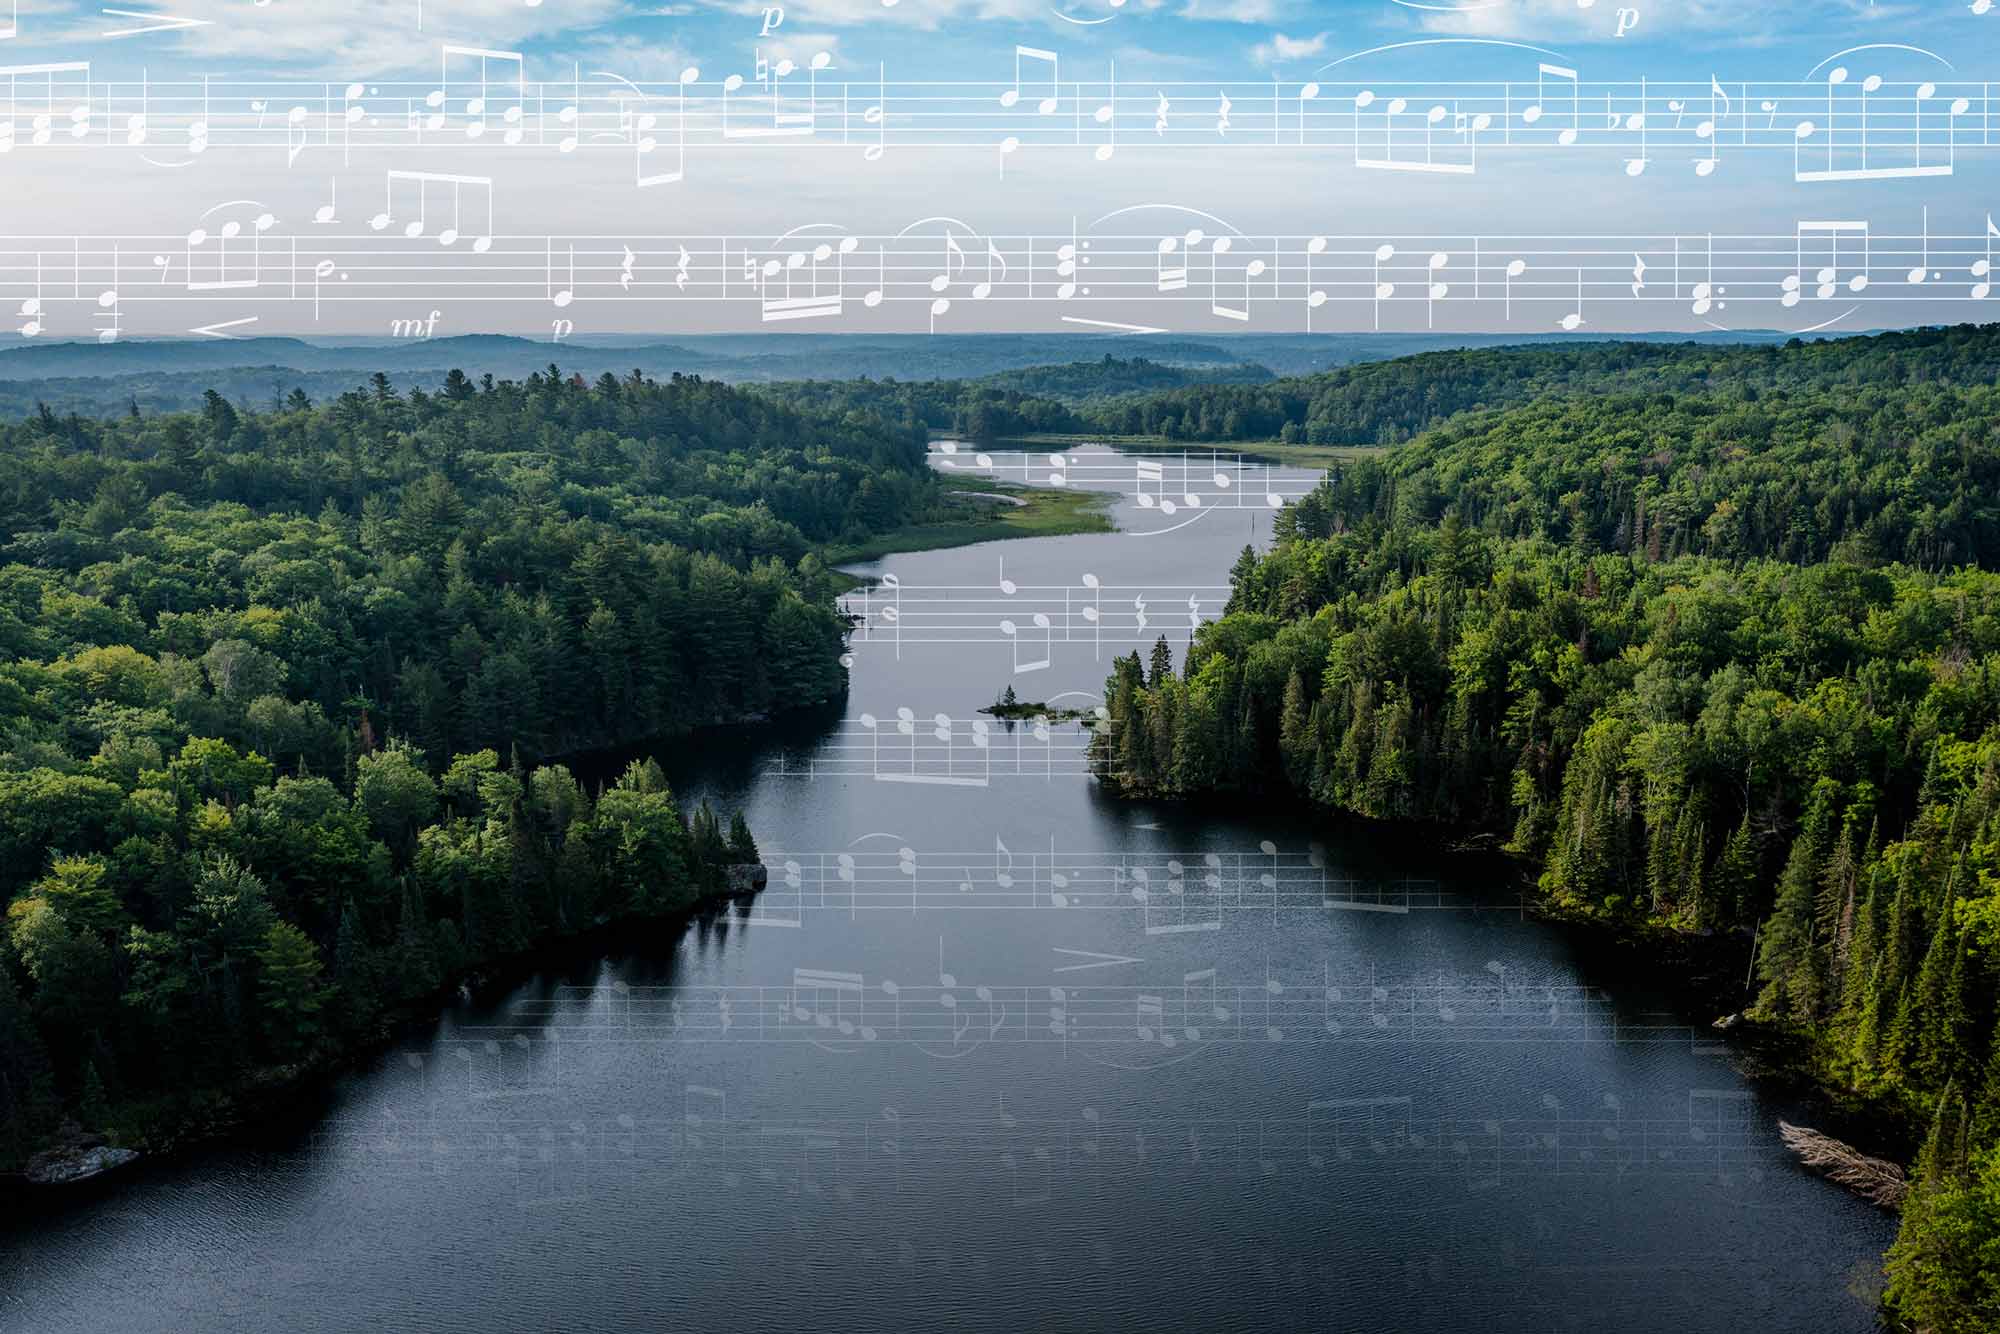 River with music overlayed